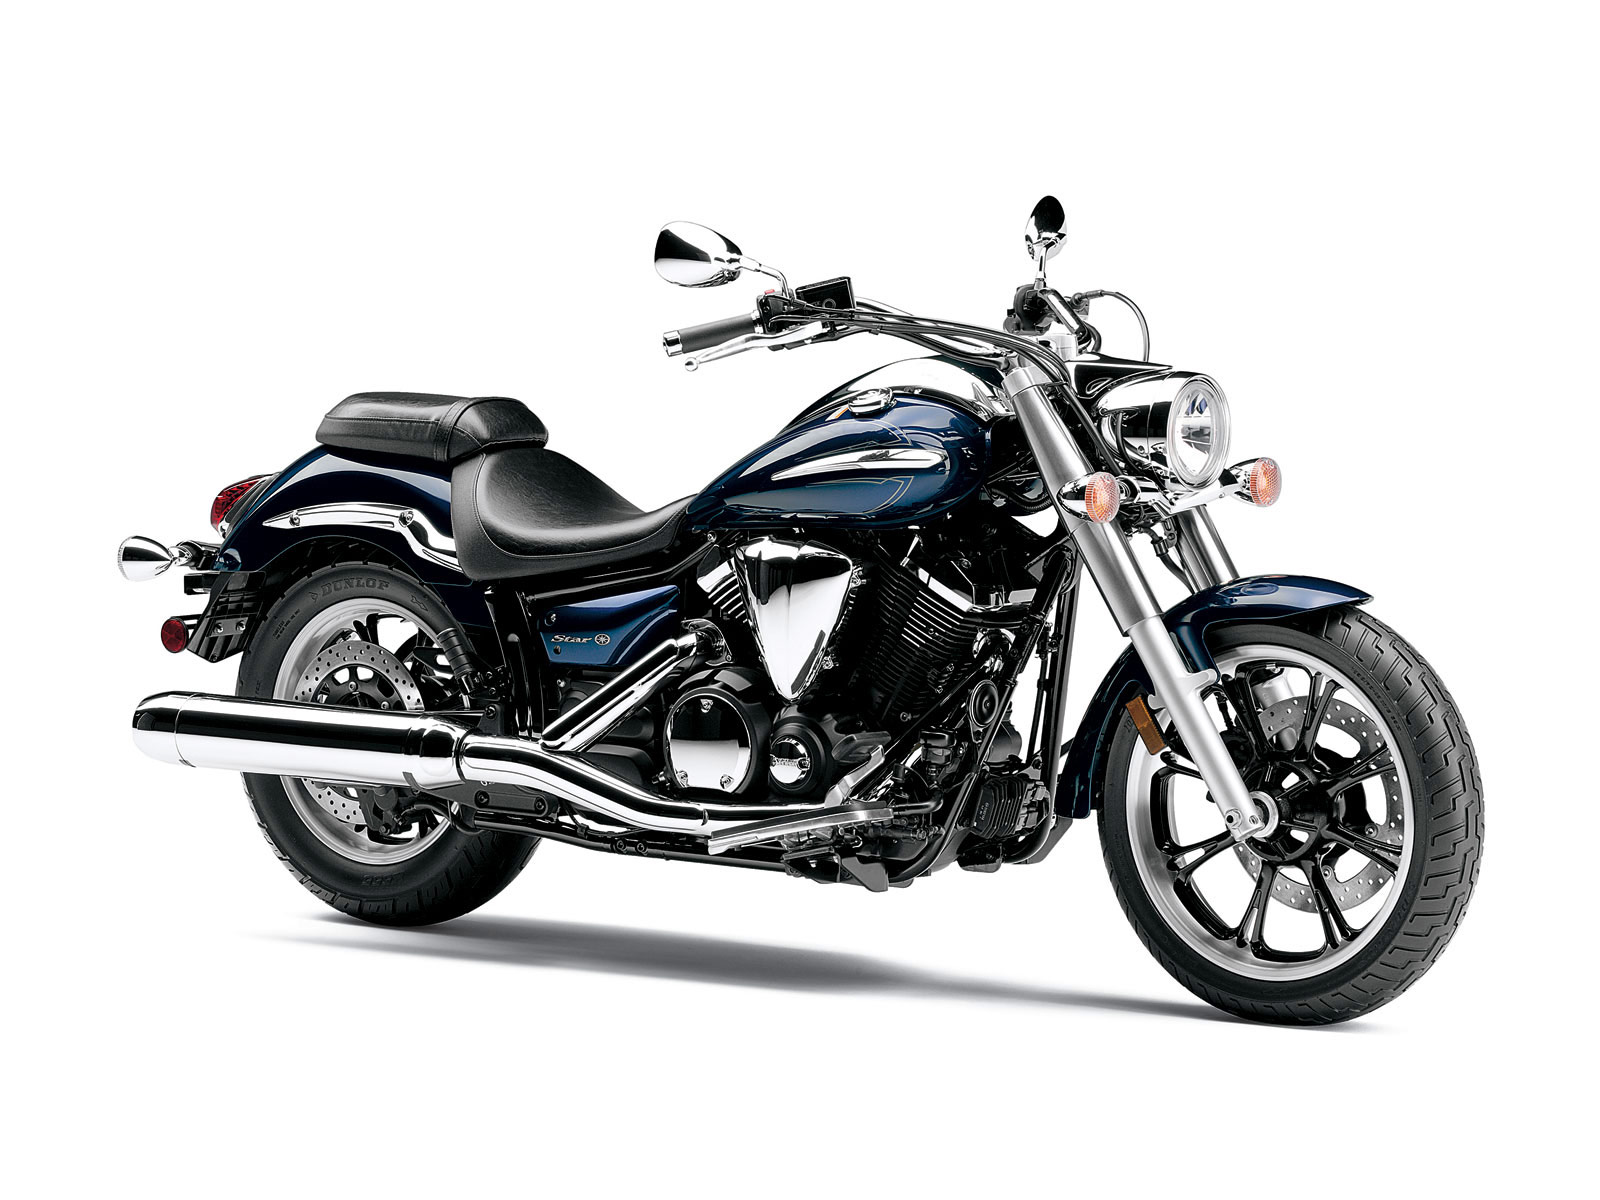 YAMAHA V Star 950 2011 motorcycle accident lawyers info